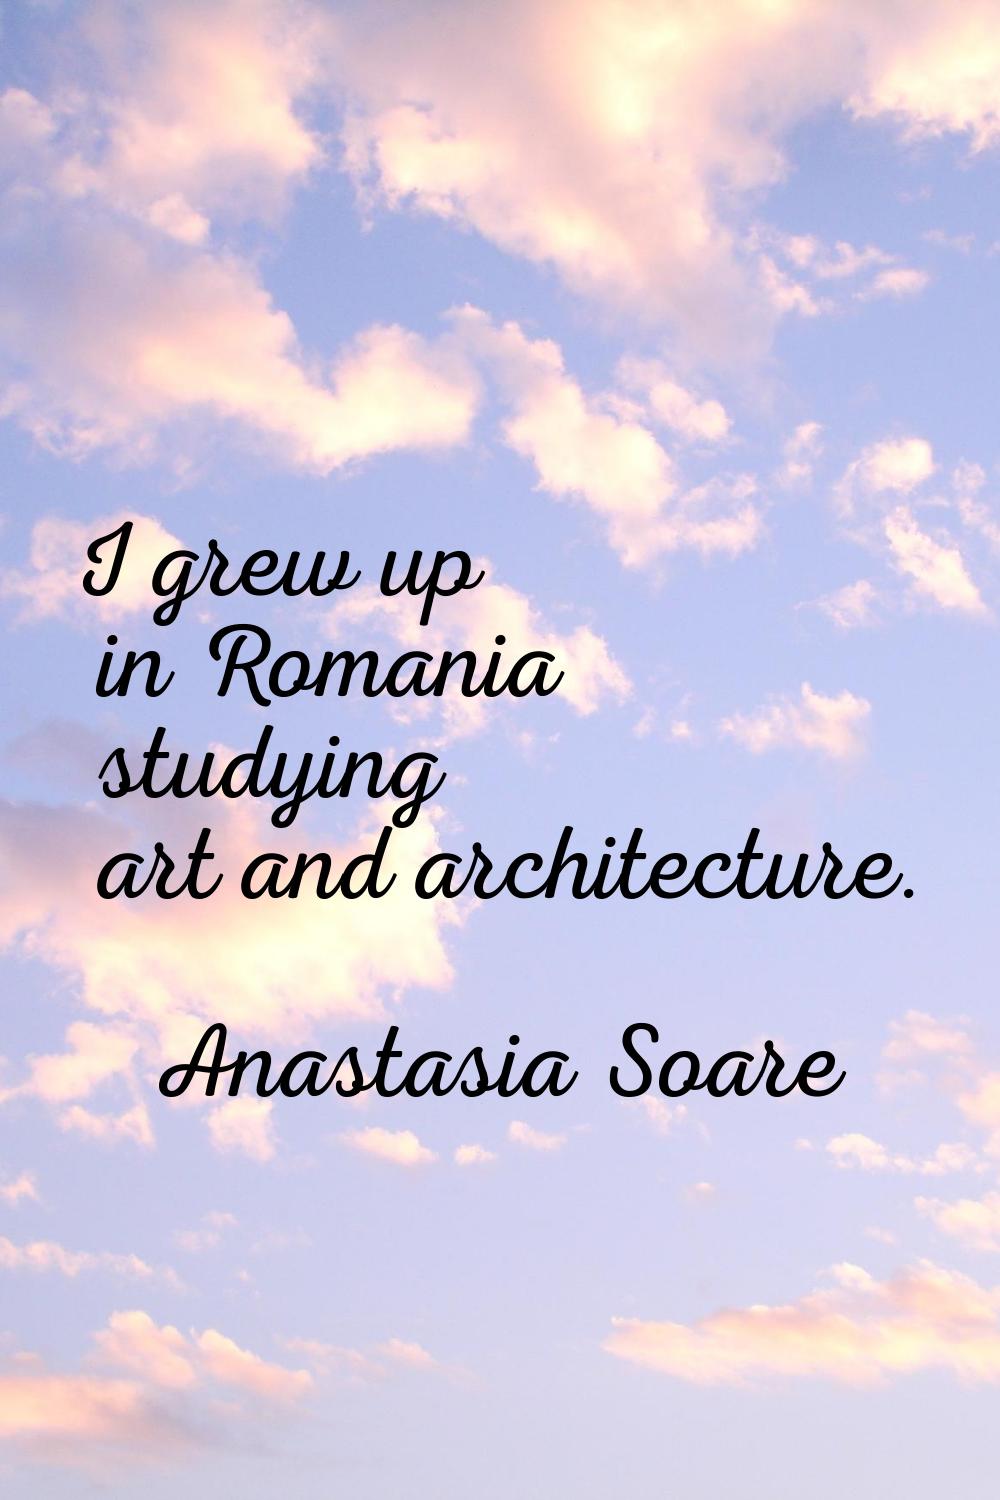 I grew up in Romania studying art and architecture.